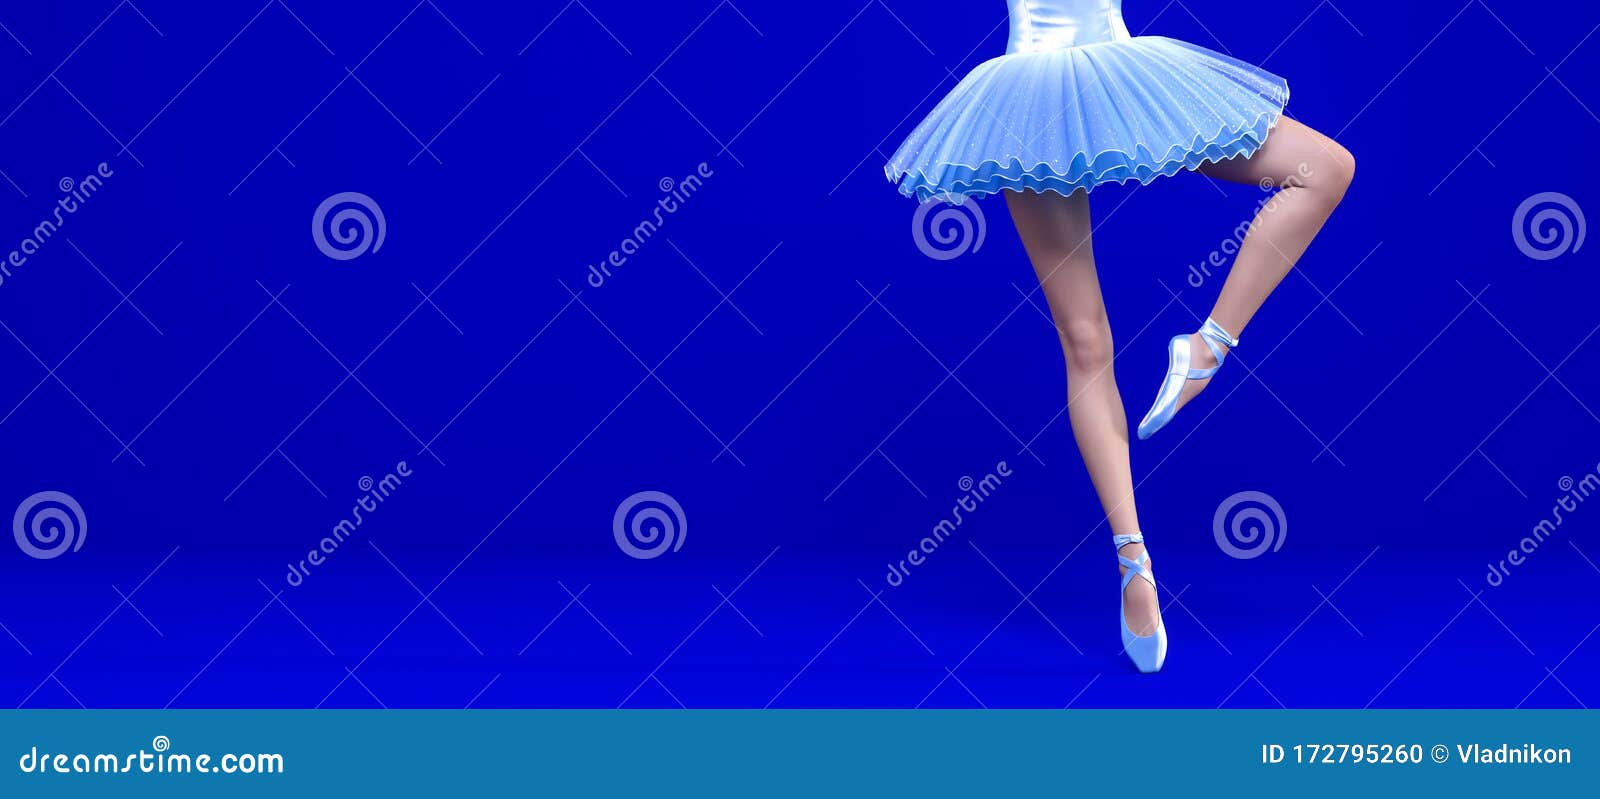 3D Ballerina Legs Blue Classic Pointe Shoes and Ballet Tutu Stock ...